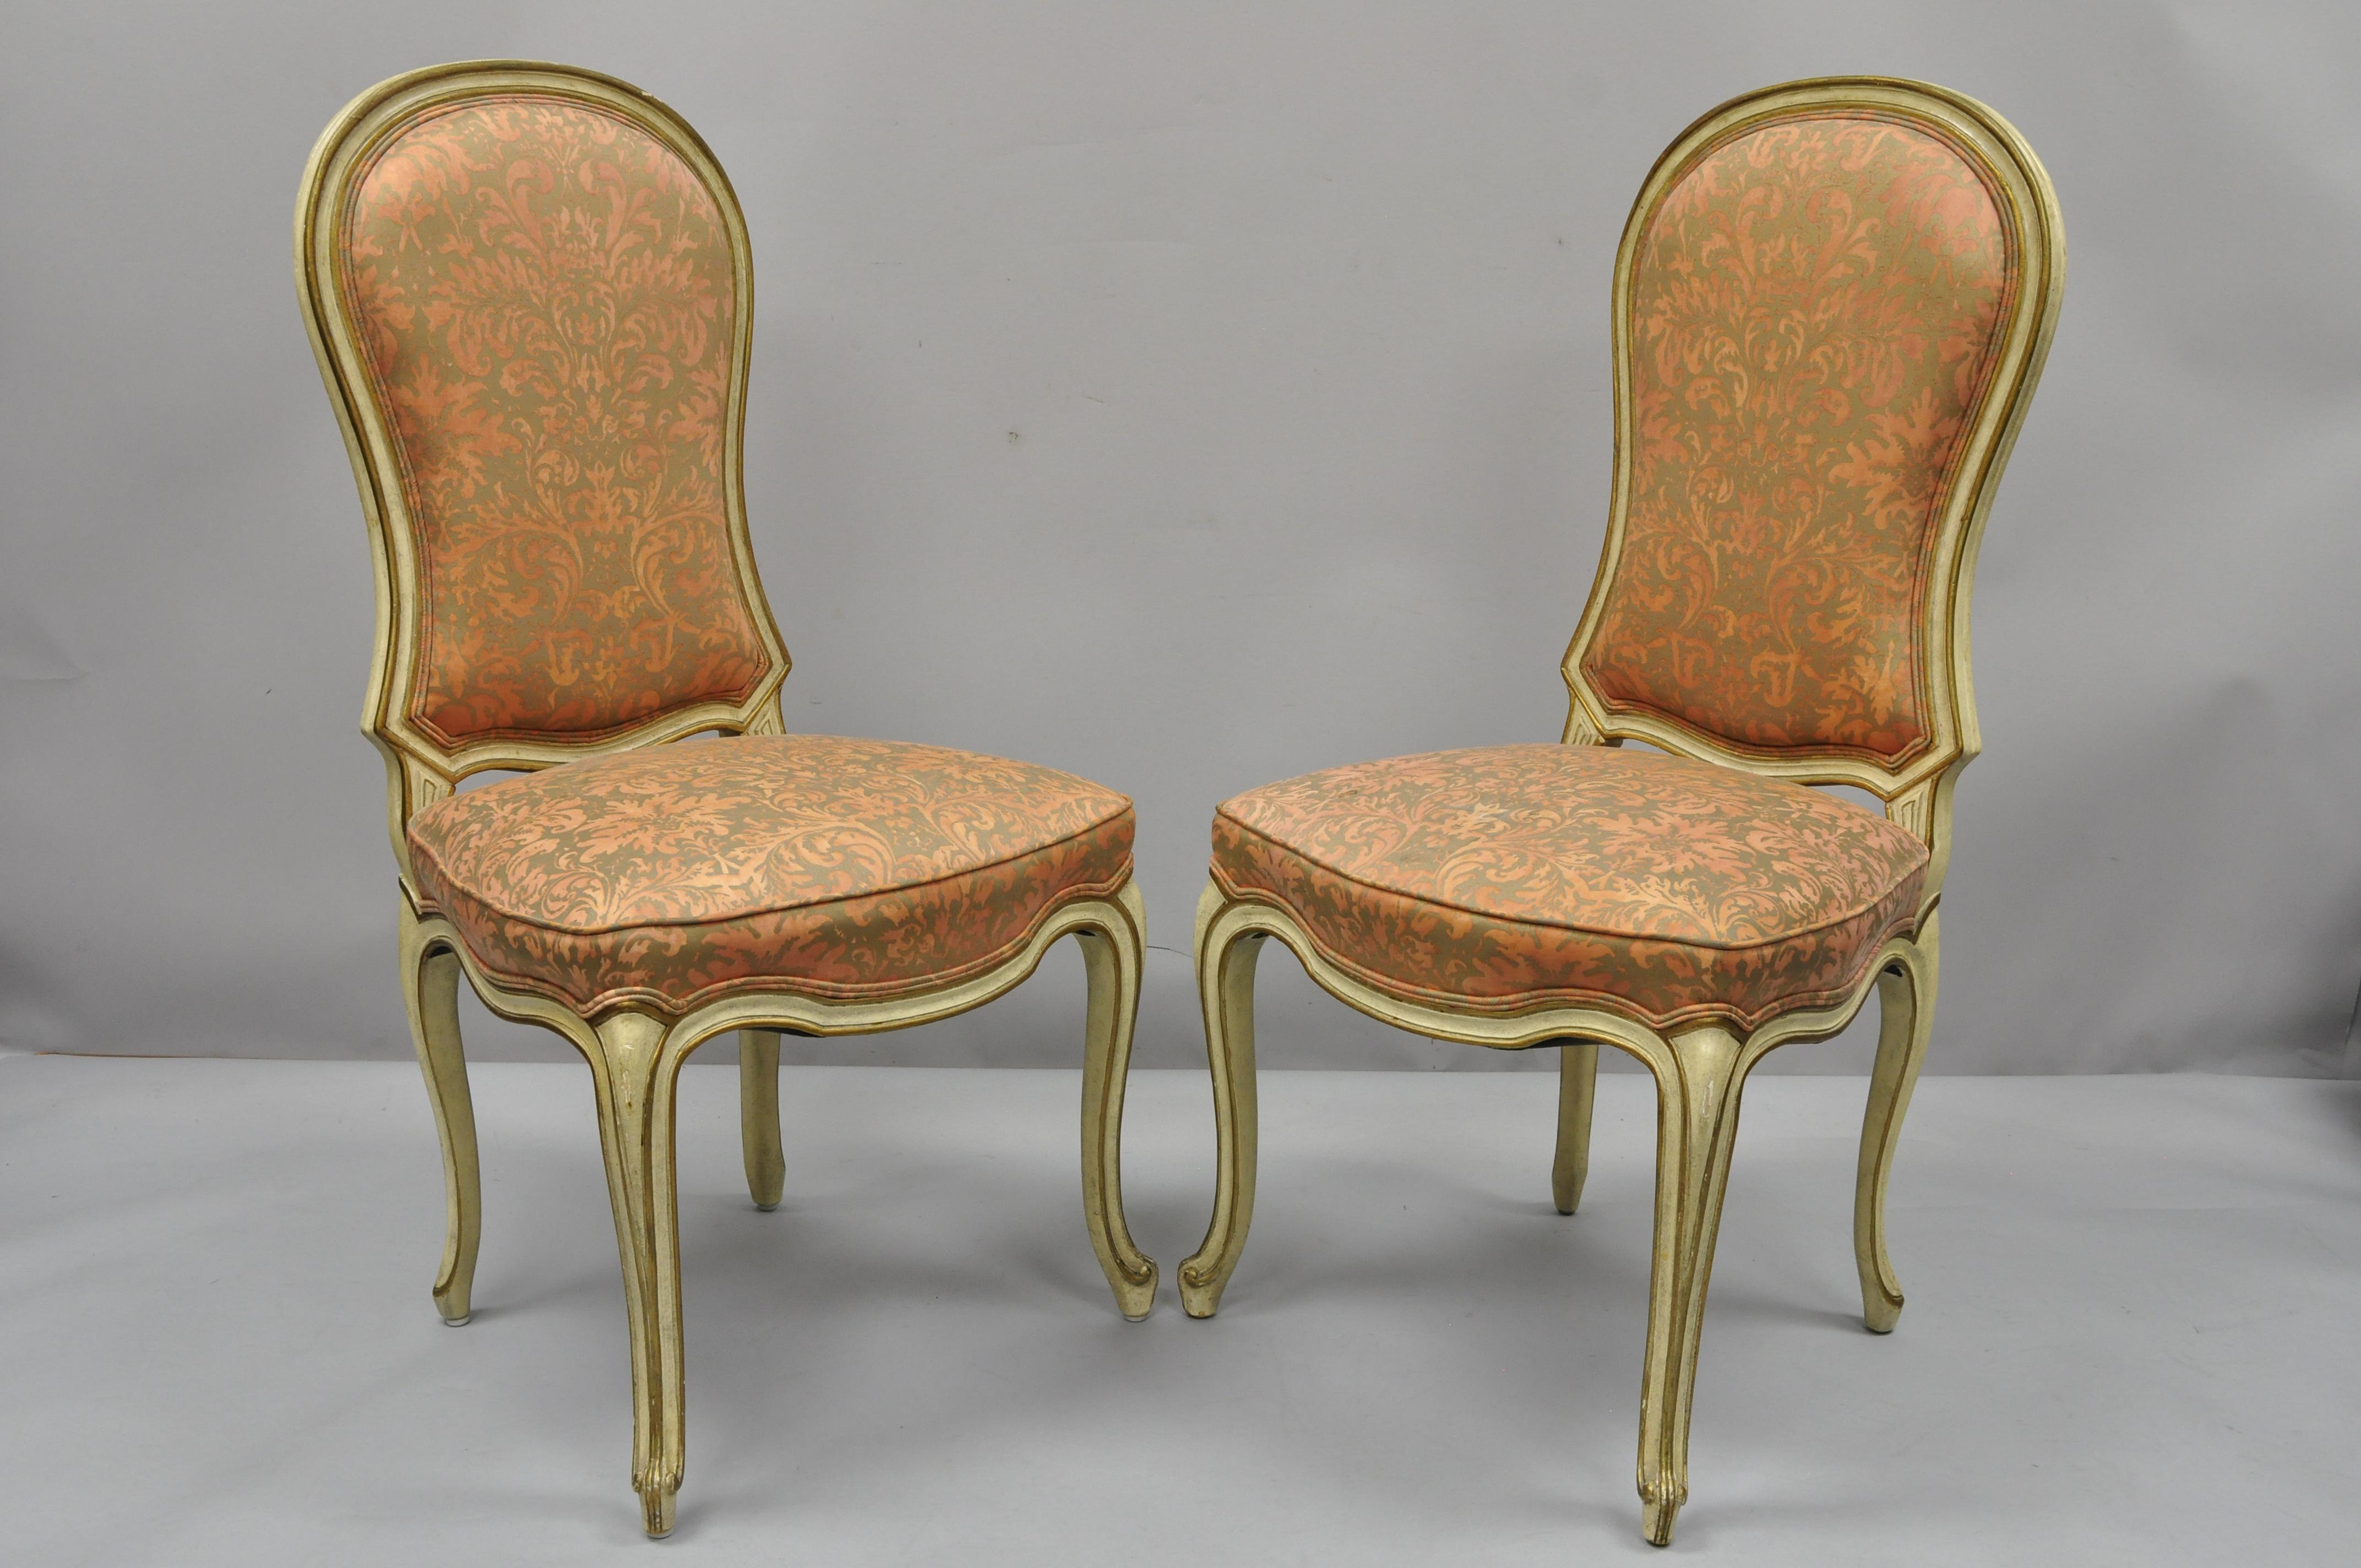 4 vintage Italian Provincial French Hollywood Regency upholstered dining side chairs. Items feature solid wood construction, upholstered back and seats, distressed finish, cabriole legs, quality craftsmanship, great style and form, mid-20th century.